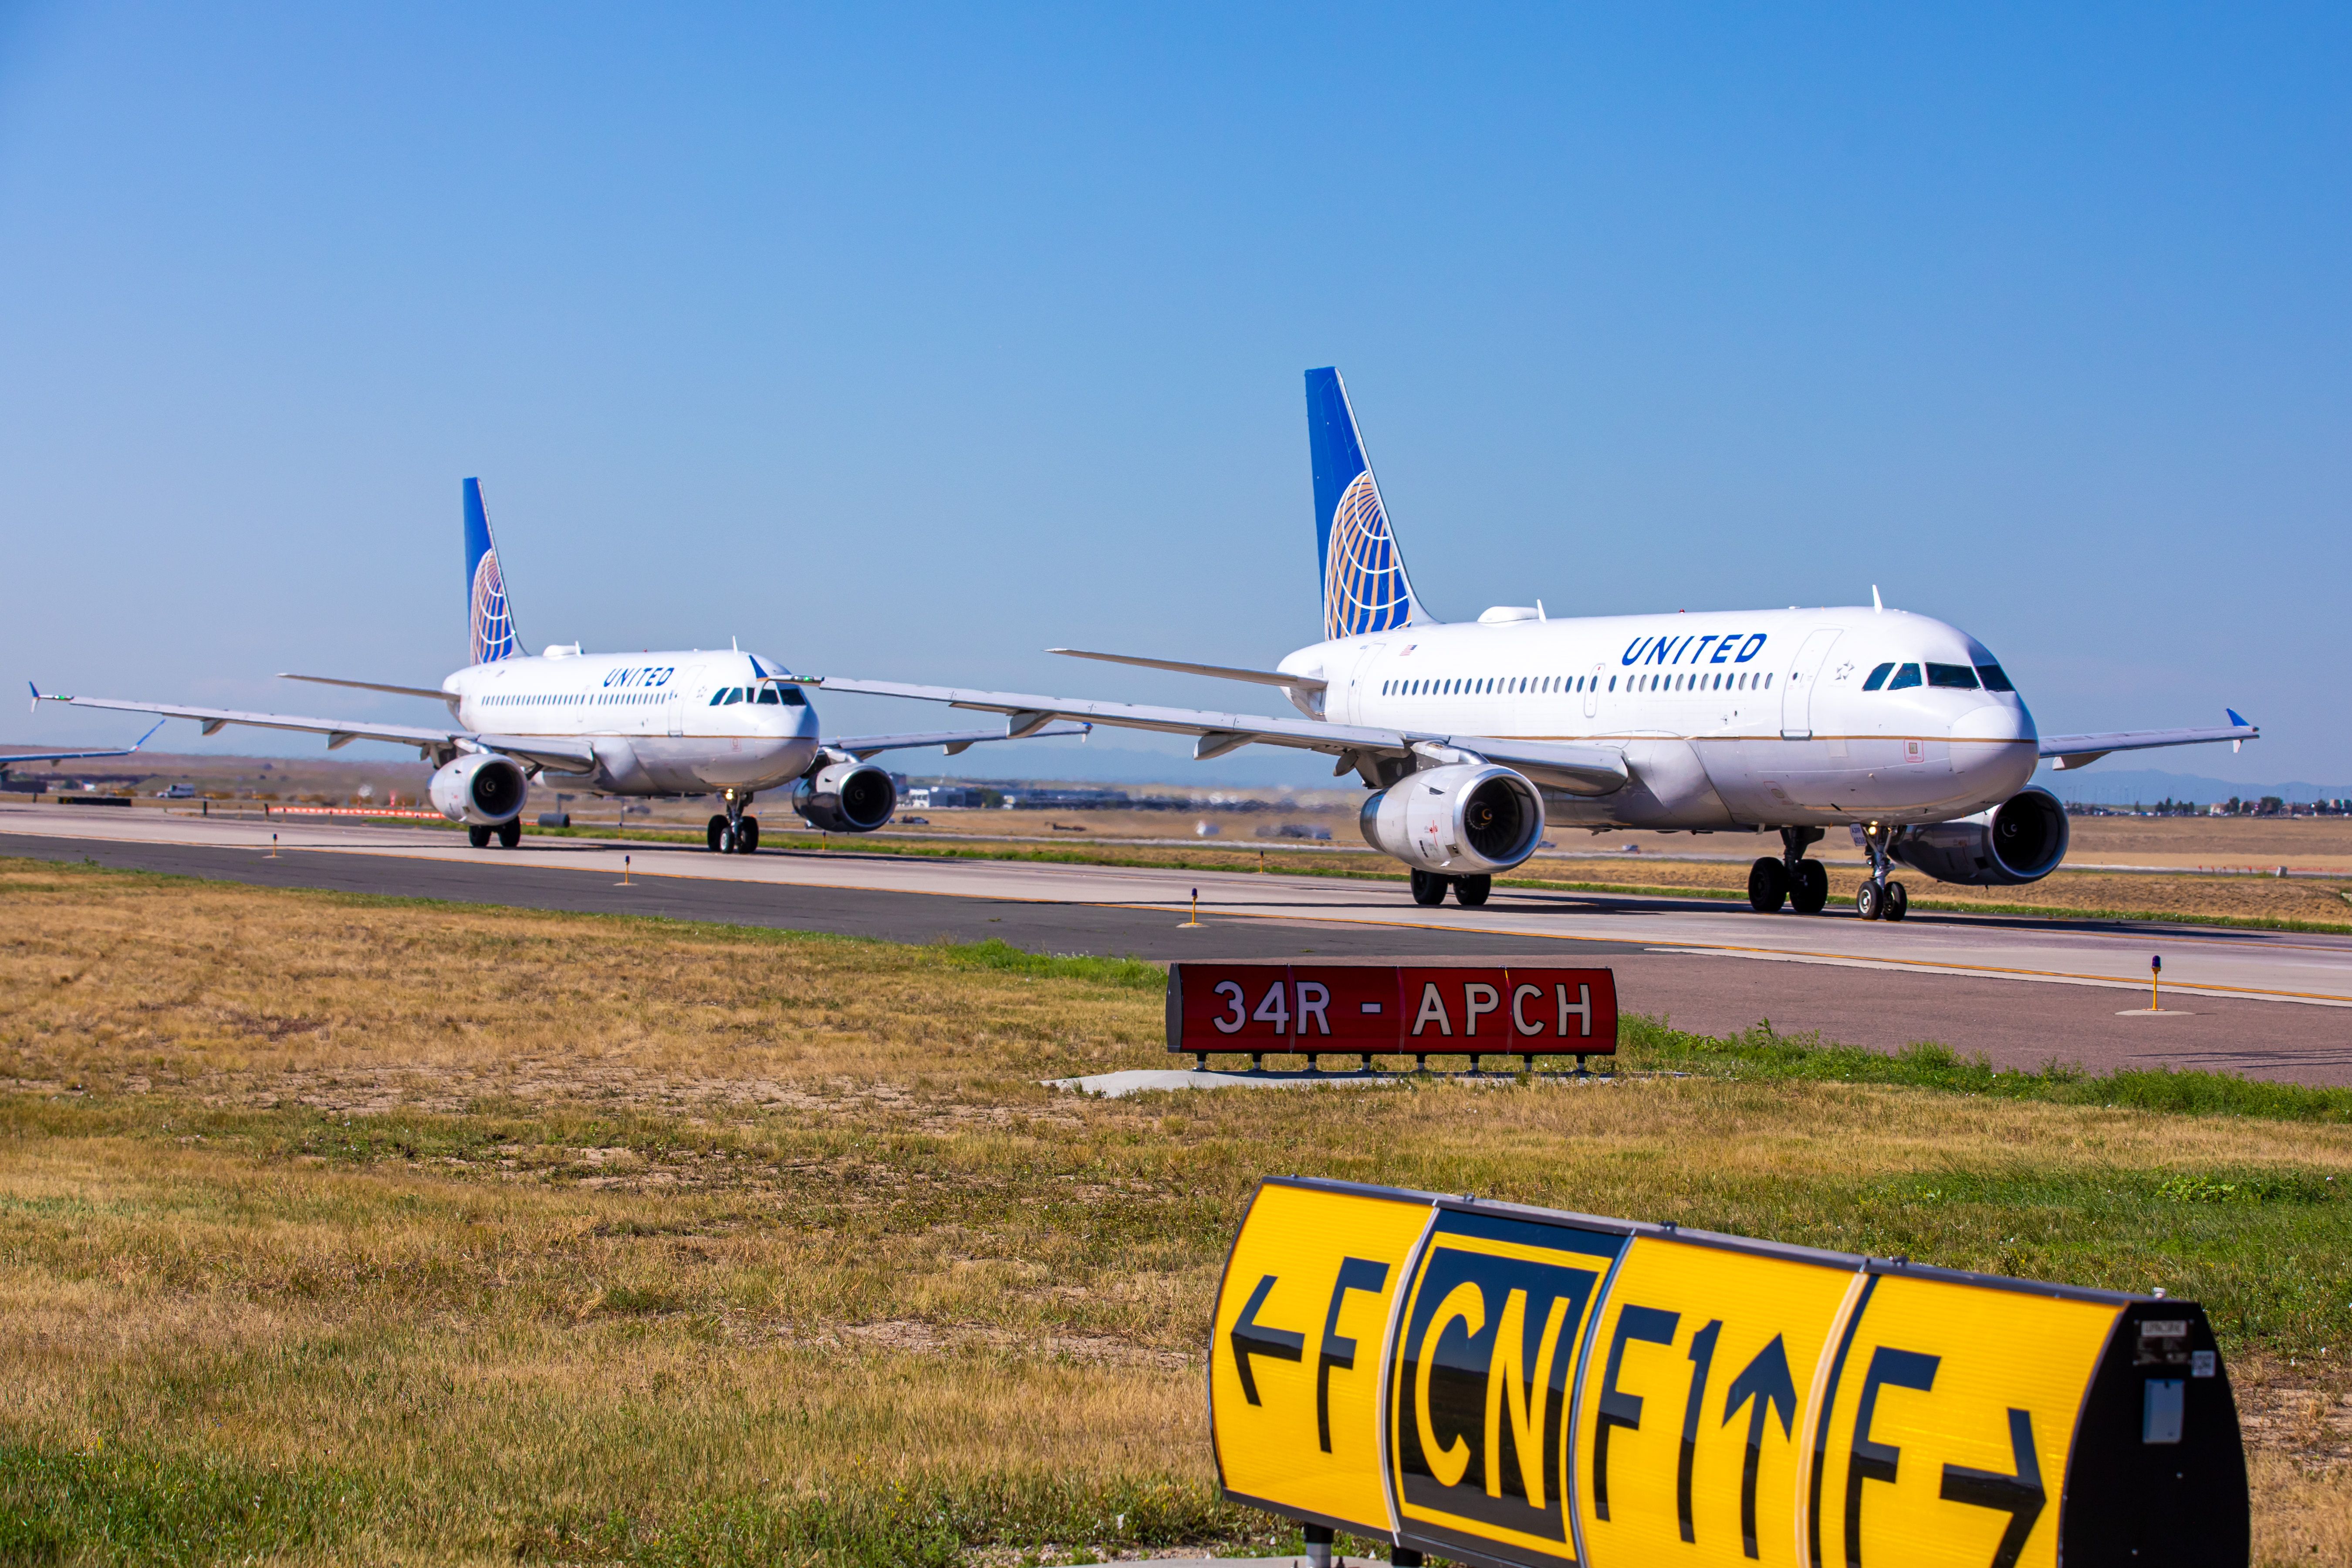 United Airlines aircraft on taxiway